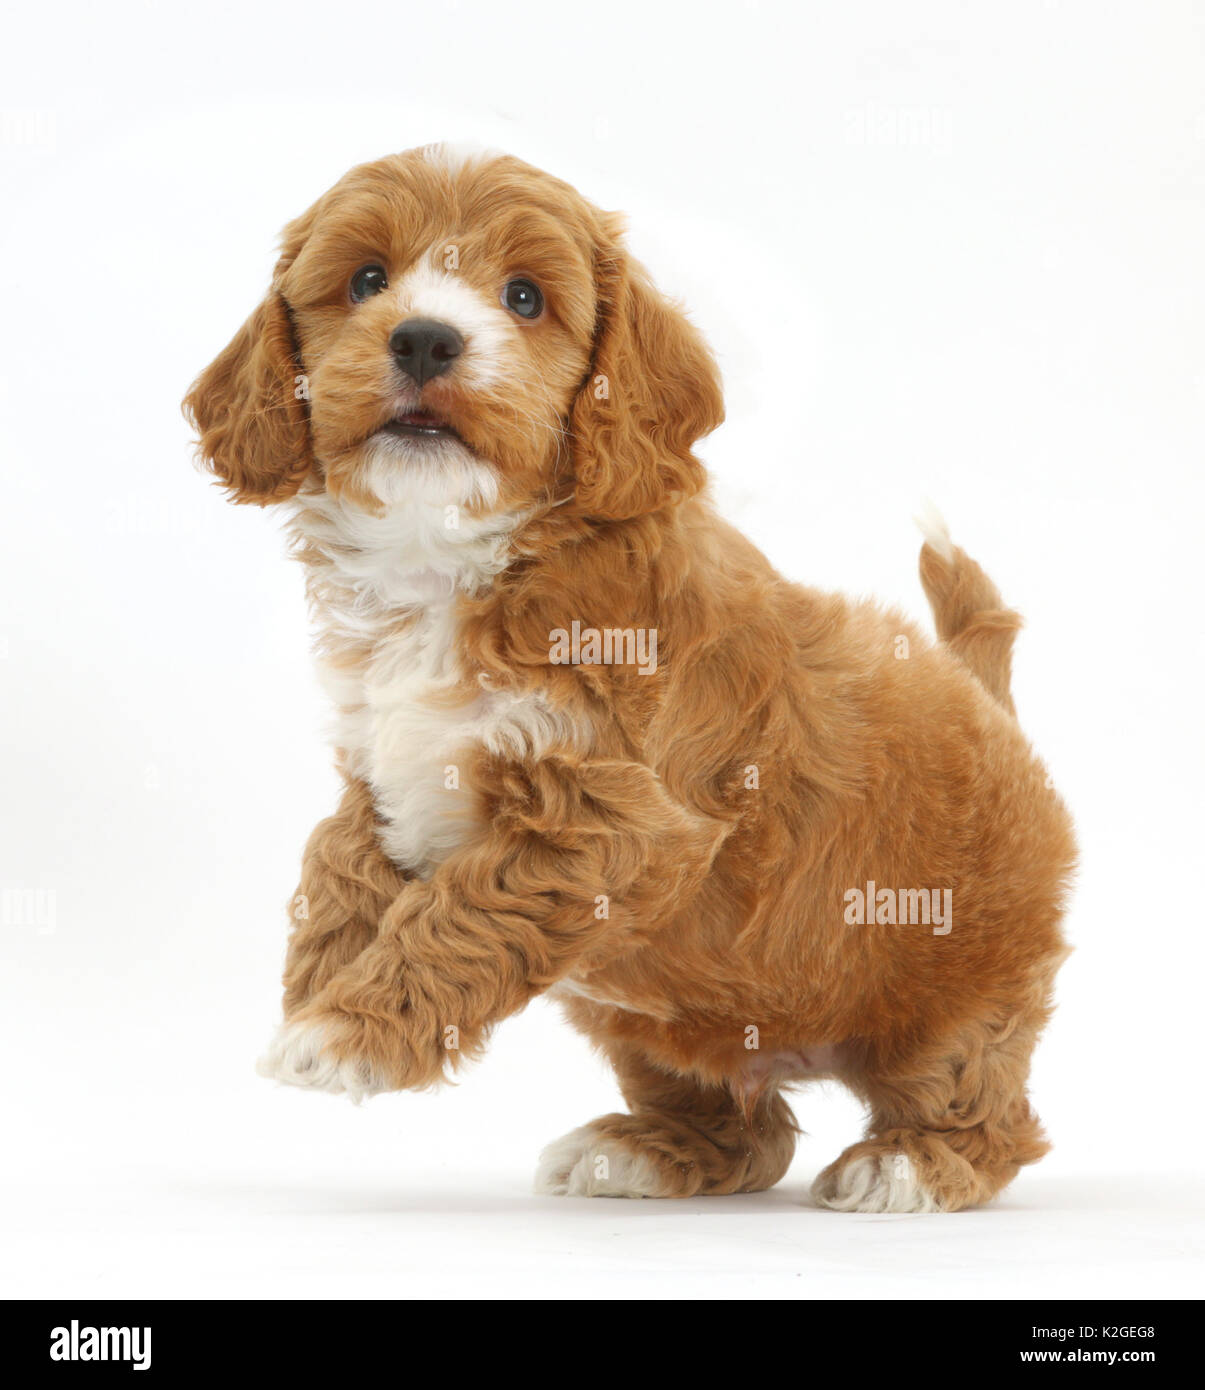 Cockapoo, Cocker spaniel cross Poodle puppy on hind legs. Stock Photo